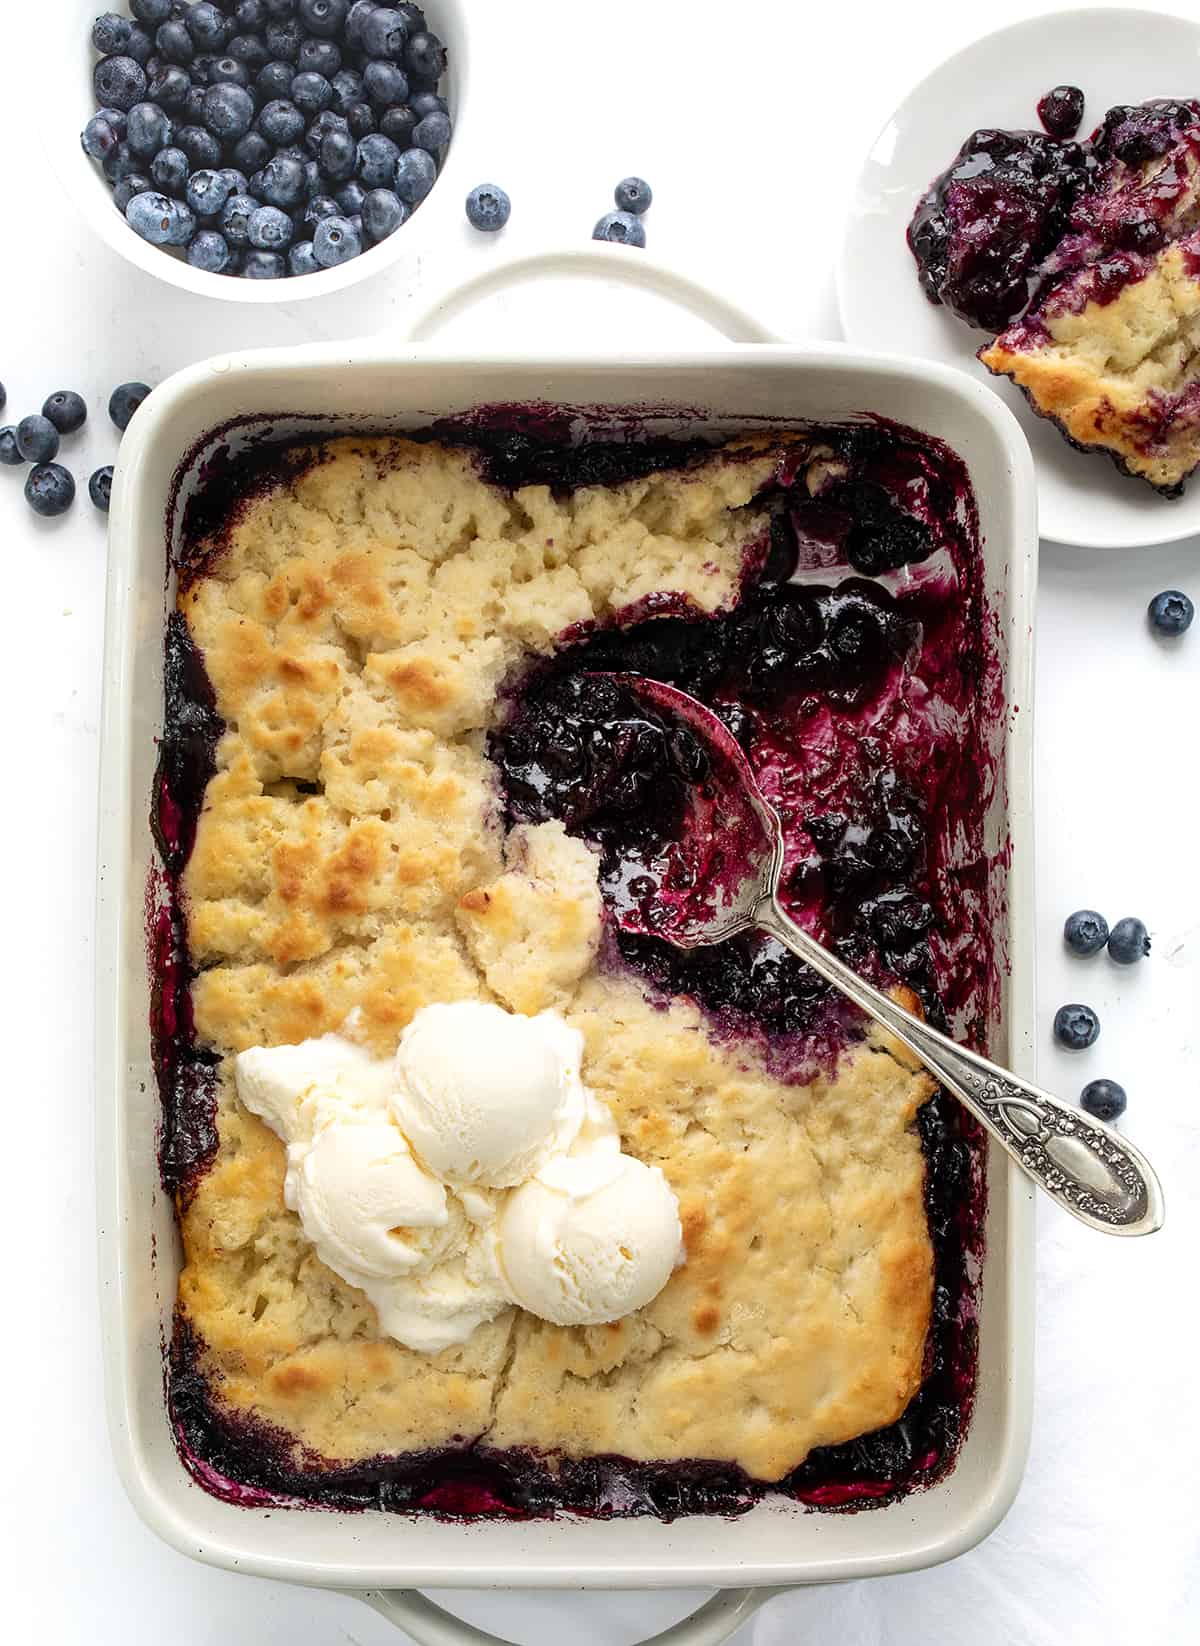 Pan of Butter Swim Biscuit Blueberry Cobbler with Ice Cream and a Plated Piece Next to Fresh Blueberries from Overhead.